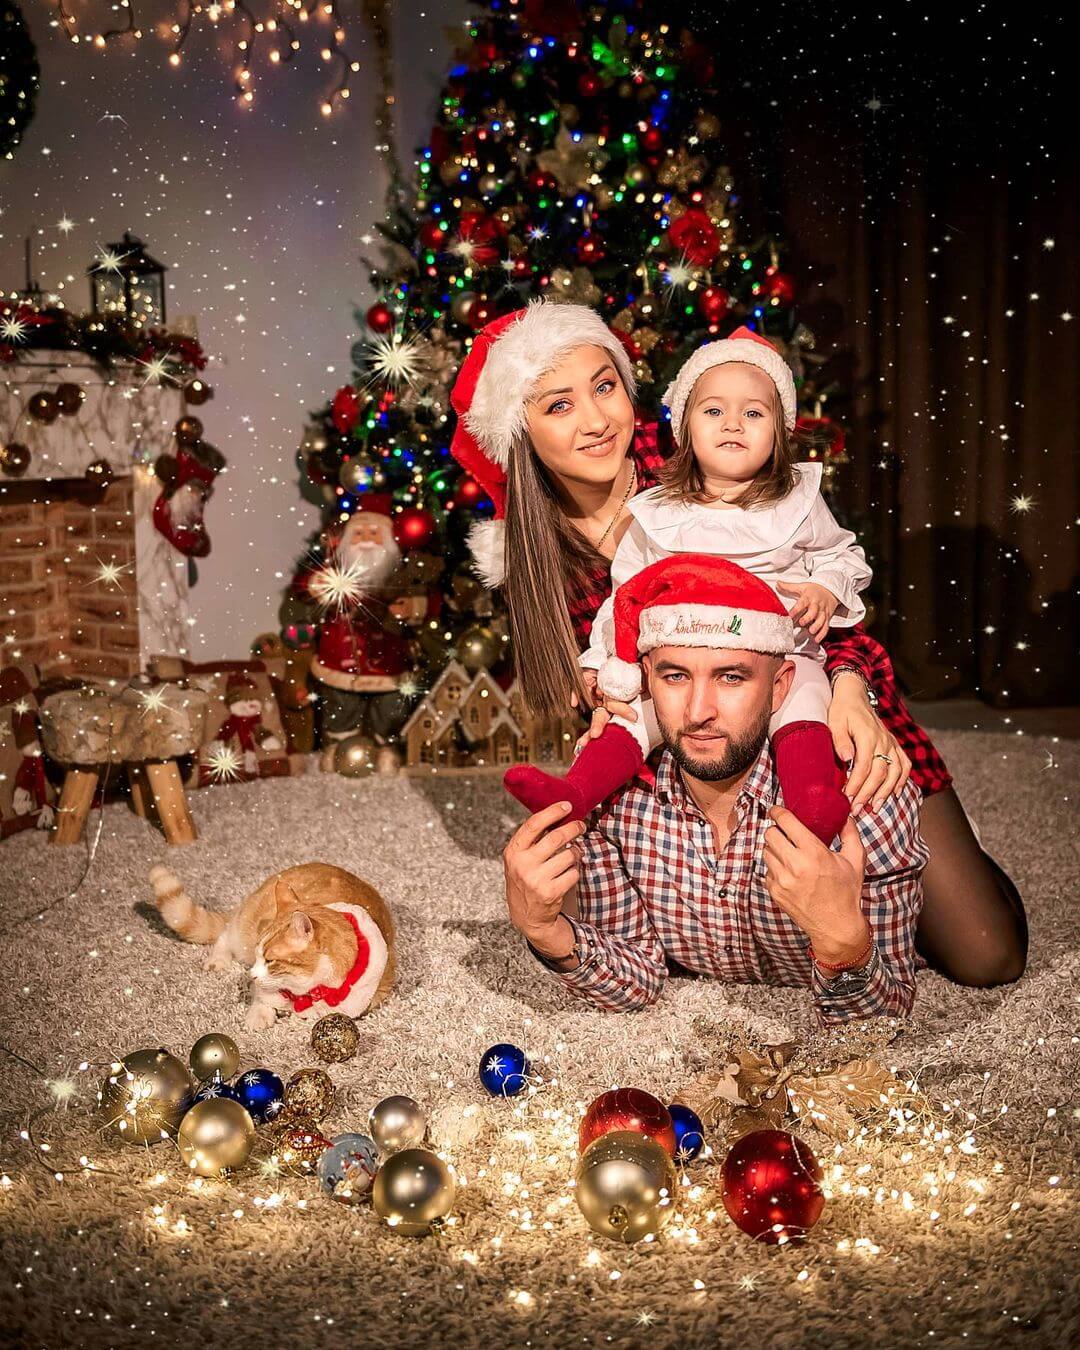 Christmas Photoshoot Ideas for Family Christmas Family Photo With Toddler